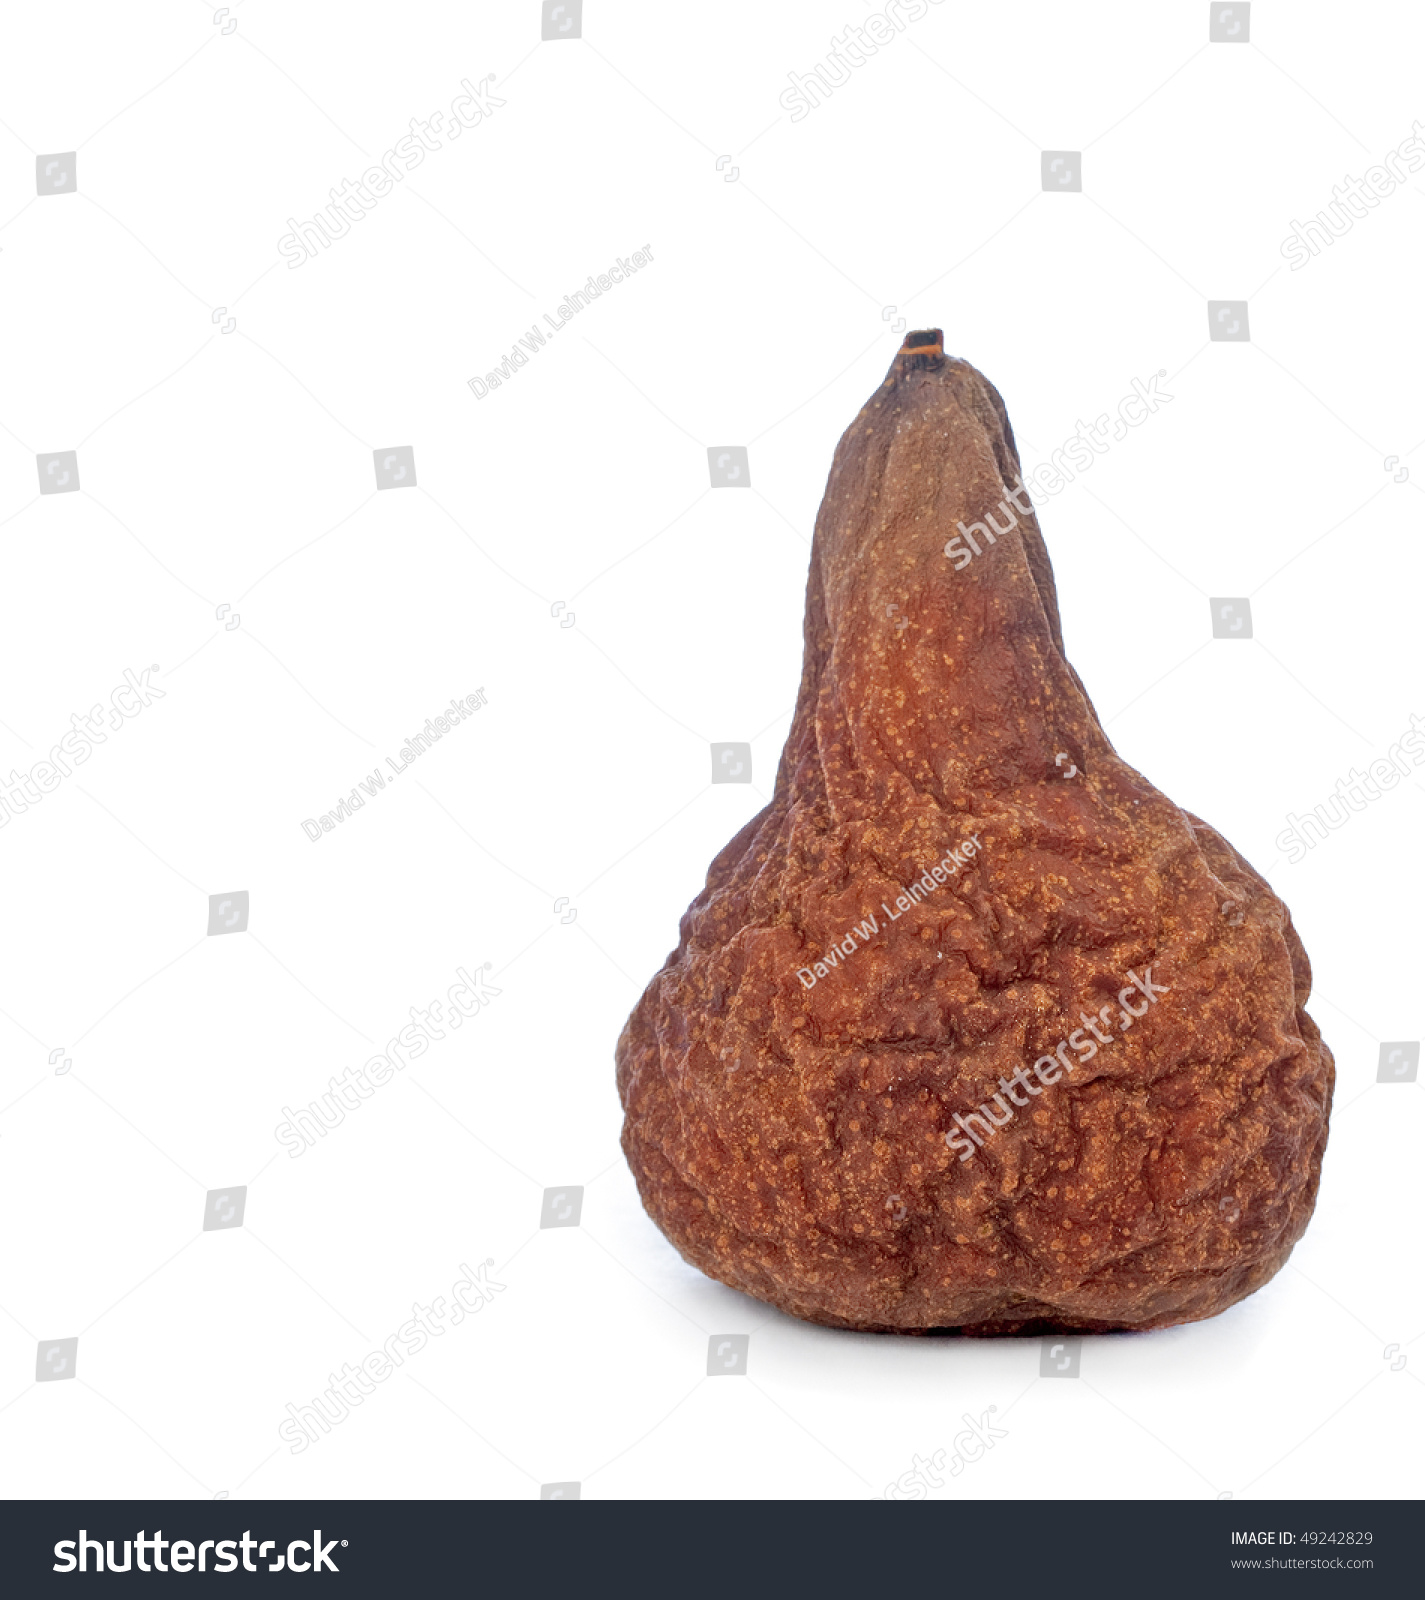 Wasted Rotten Green Pear Stock Photo 49242829 - Shutterstock